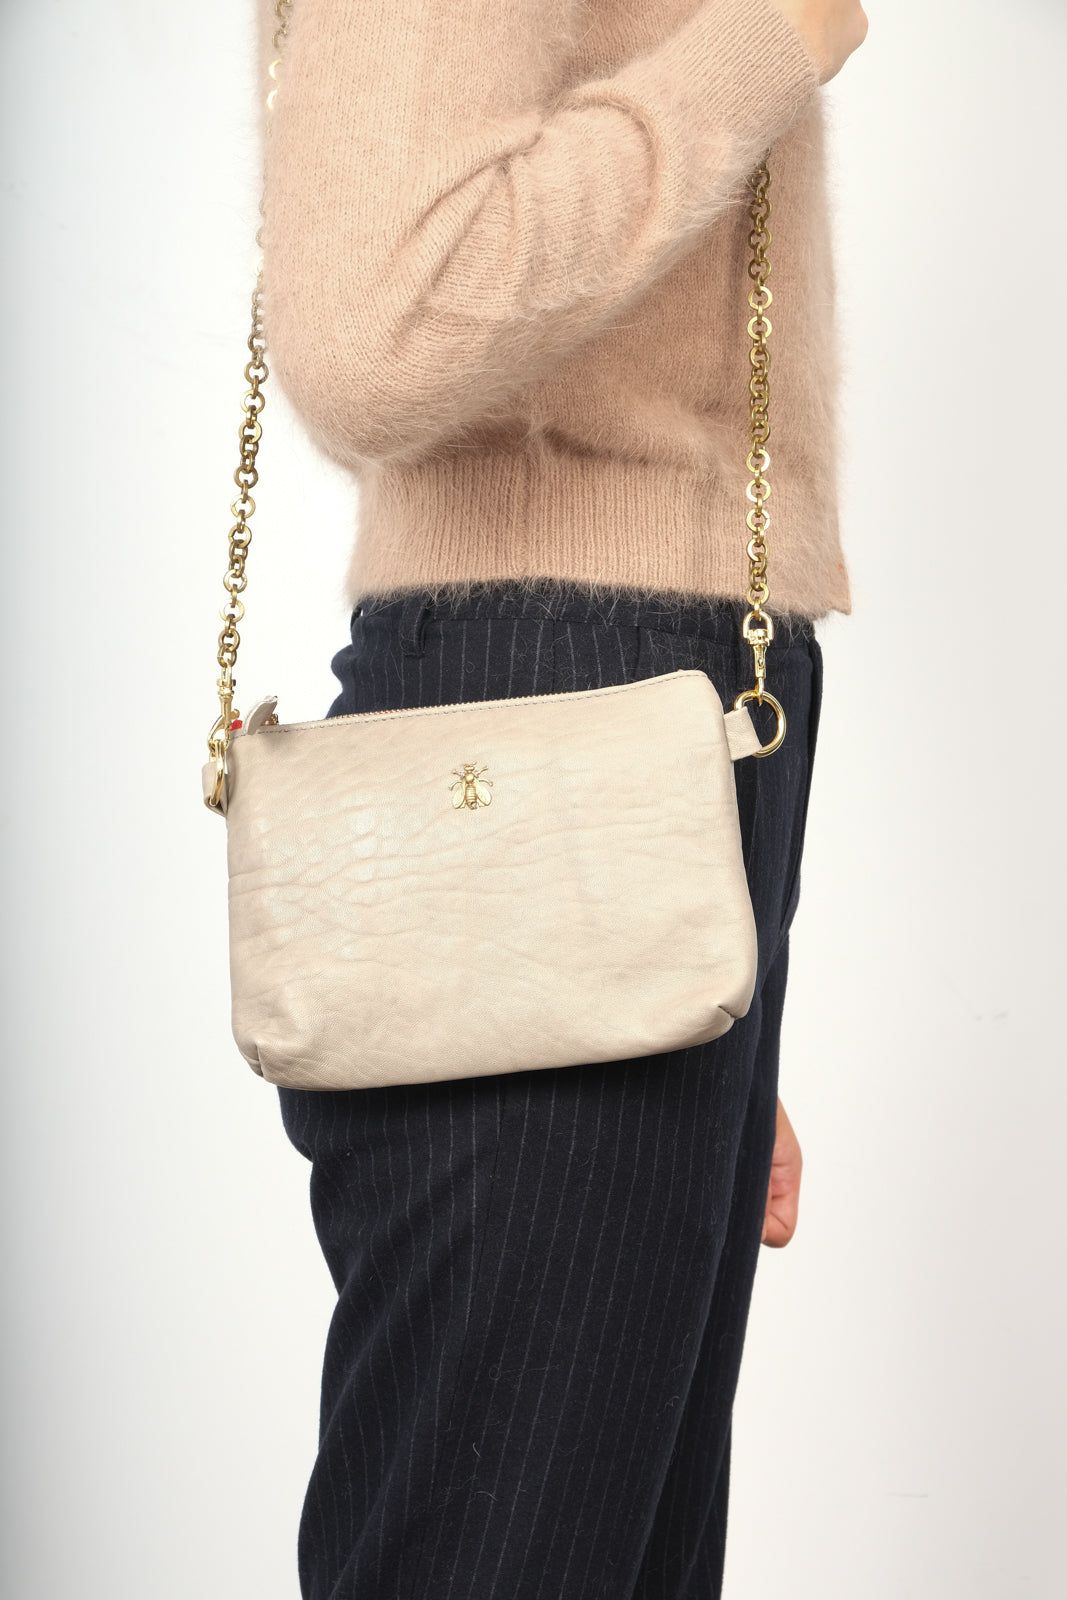 SLP Chapala bag in pearl with bee motif